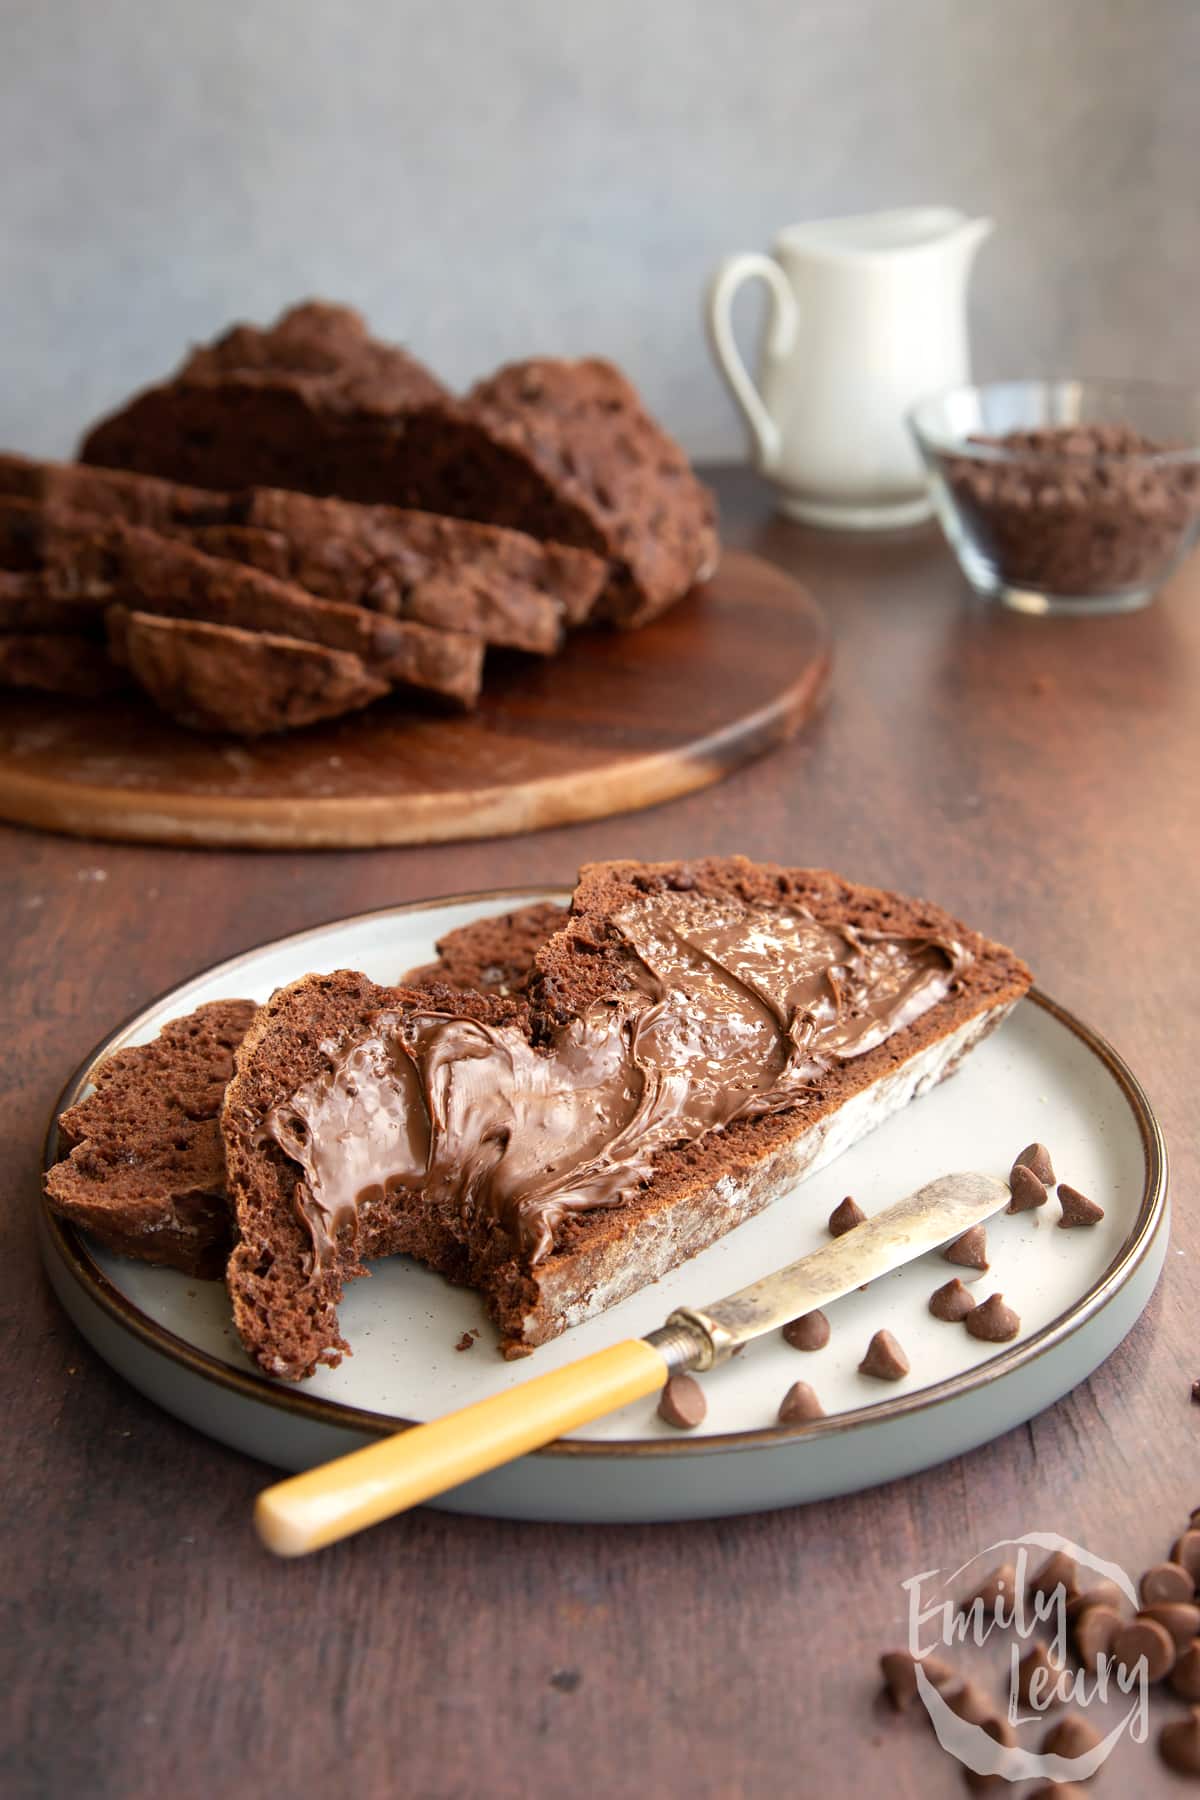 A finished slice of chocolate soda bread served on a decorative plate.